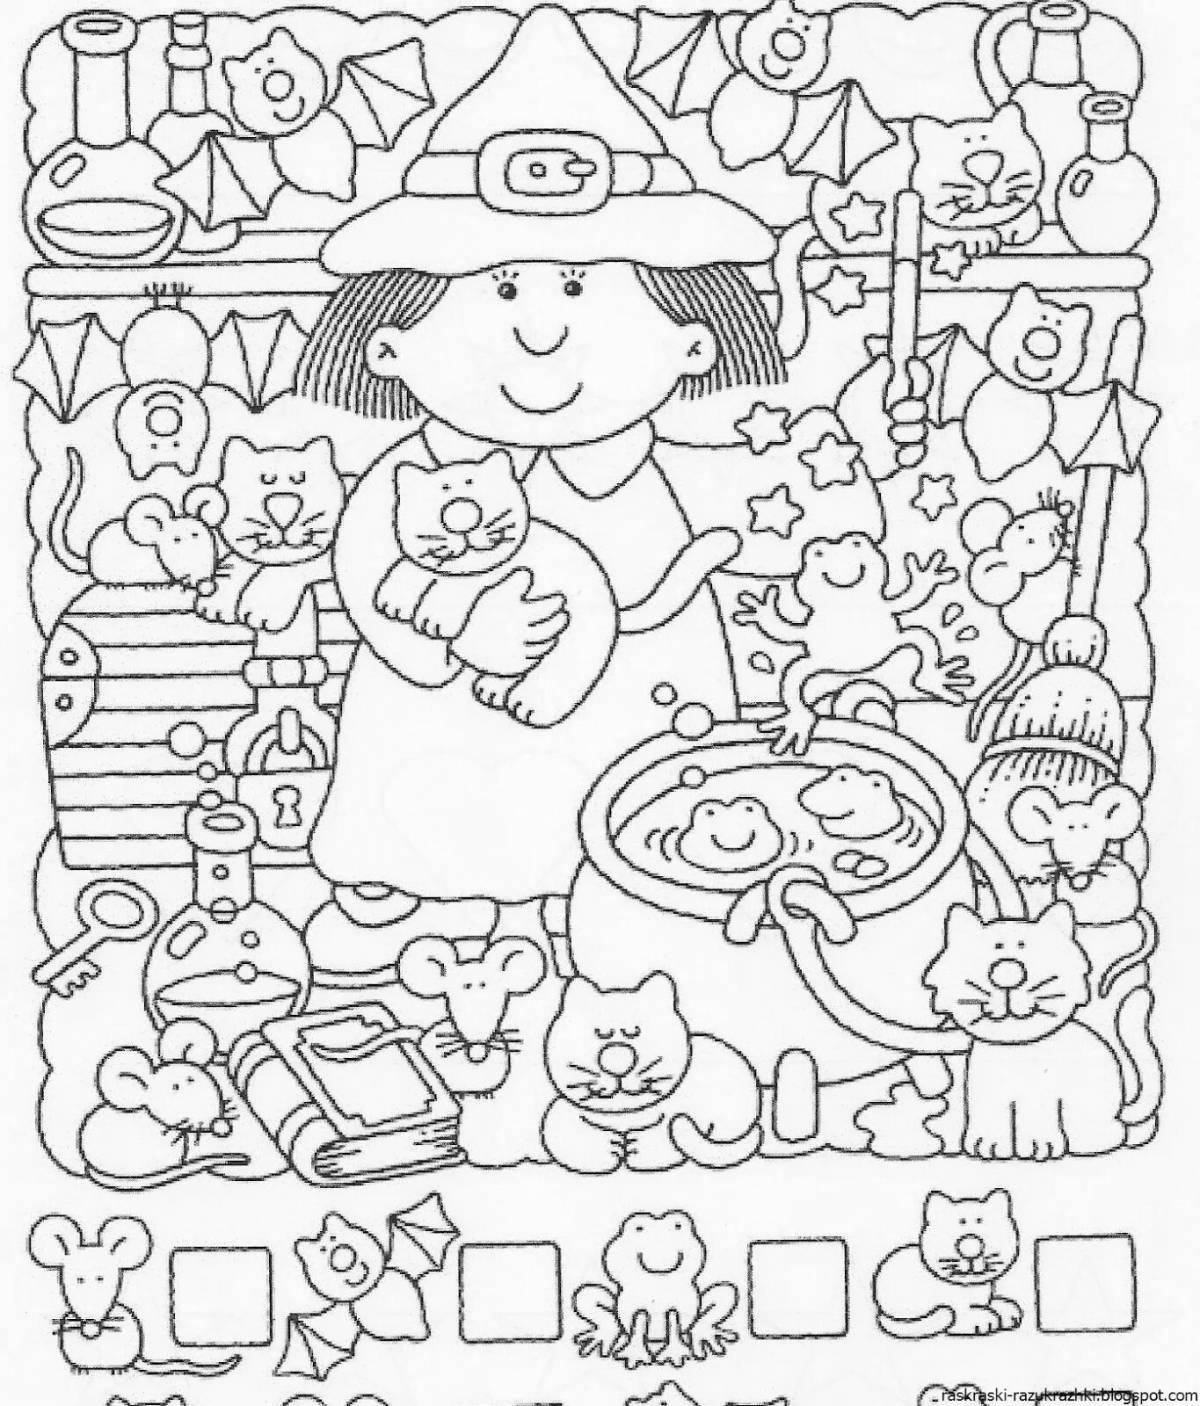 Attractive coloring book for 7-8 year olds